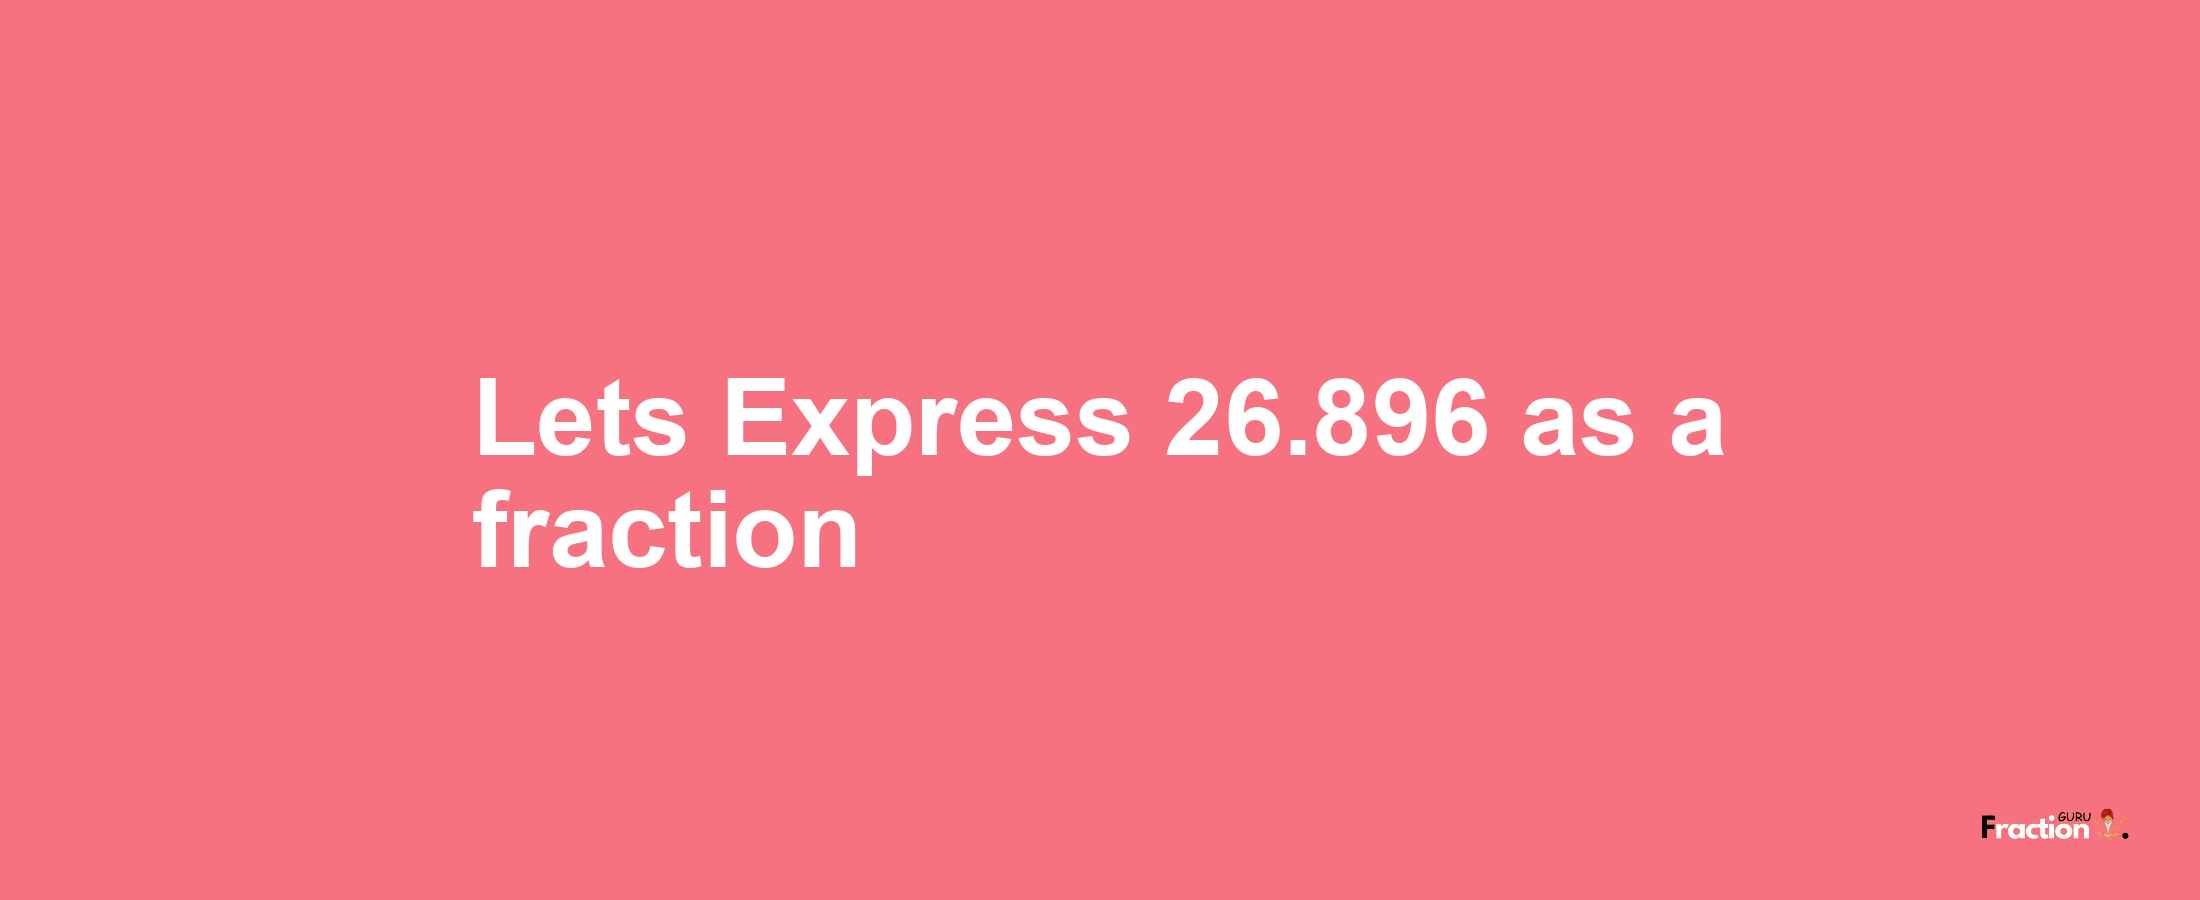 Lets Express 26.896 as afraction